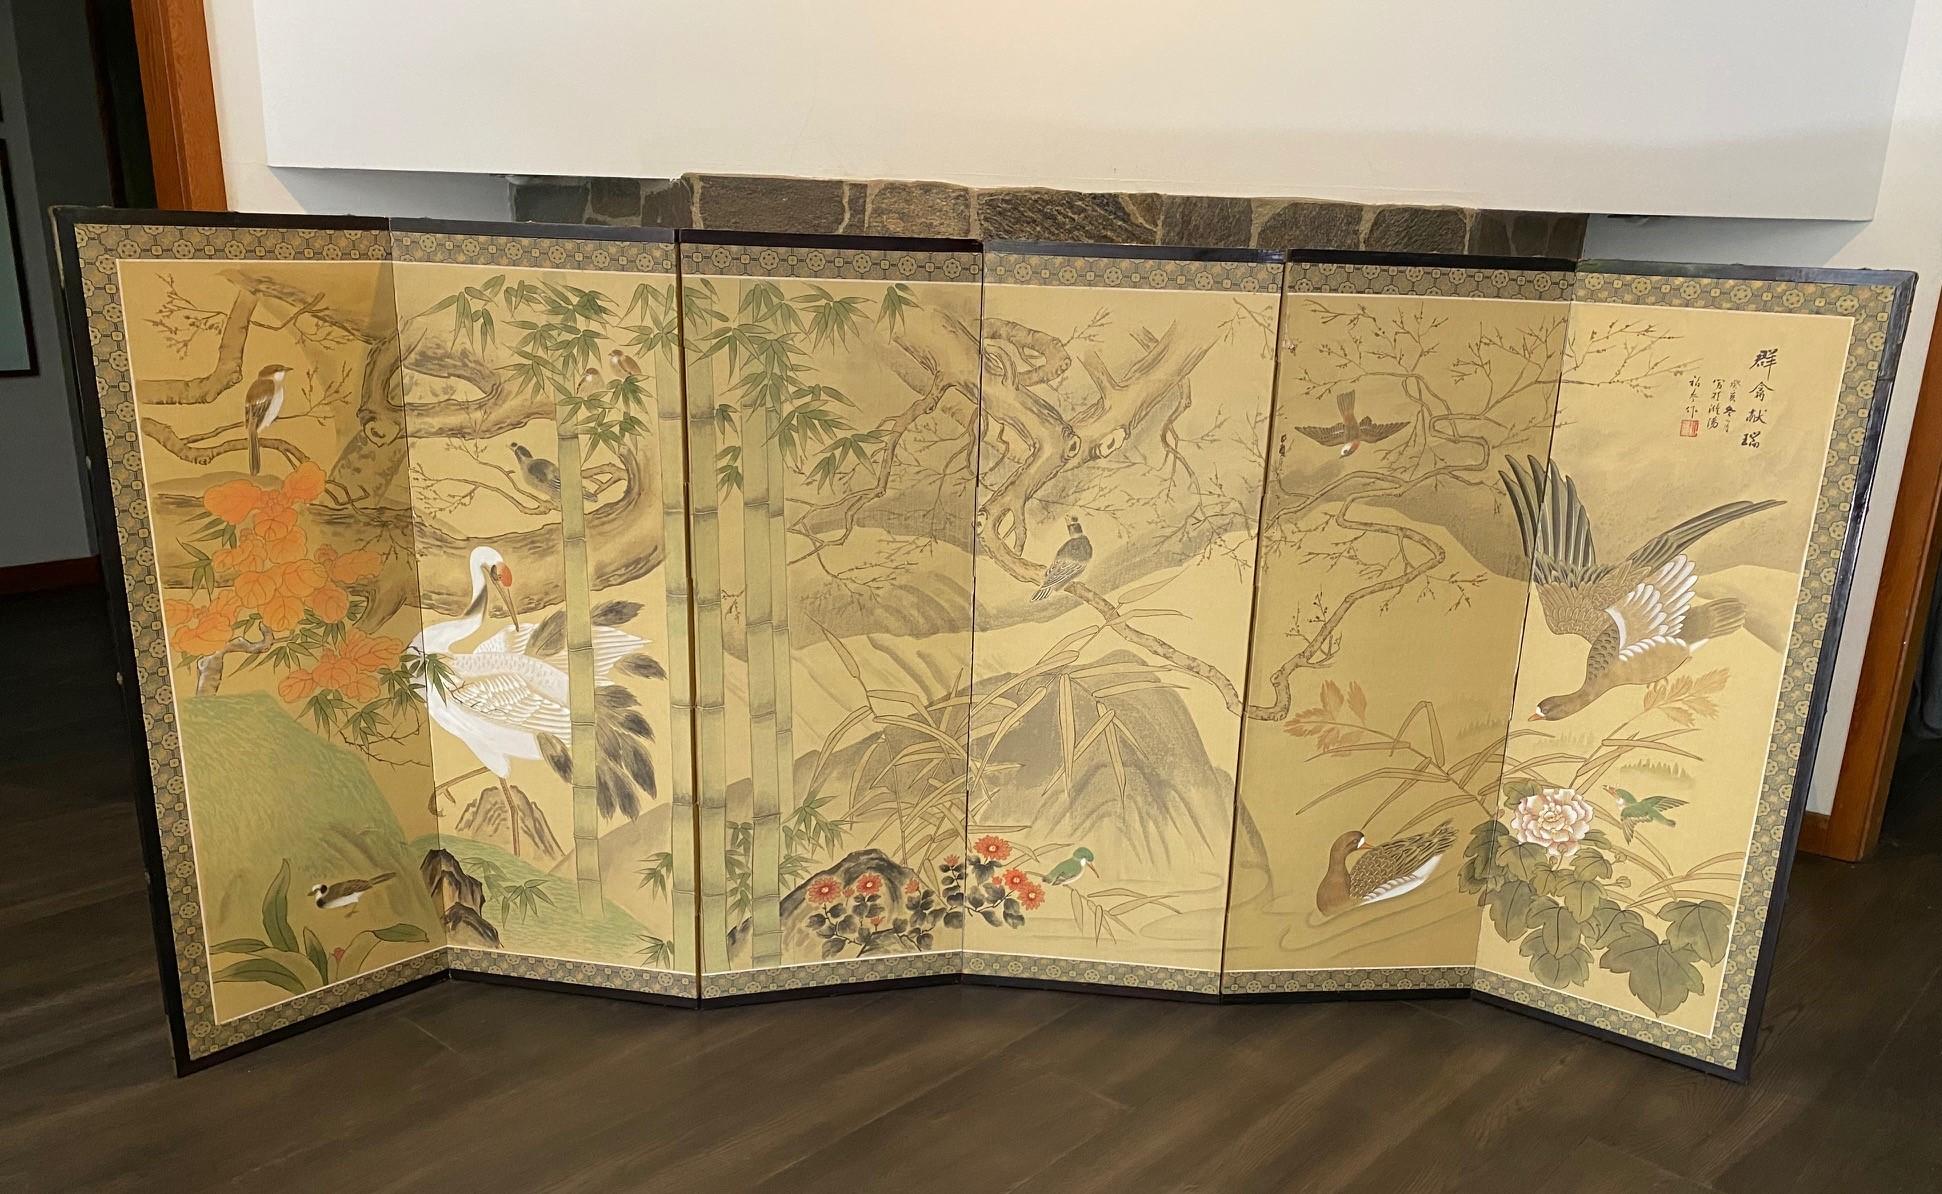 A gorgeous six-panel Japanese Byobu folding screen depicting various species of playful birds in a natural tree-filled landscape with surrounding ponds. The rich colors, complex composition, and beautiful hand painted detail really makes this an